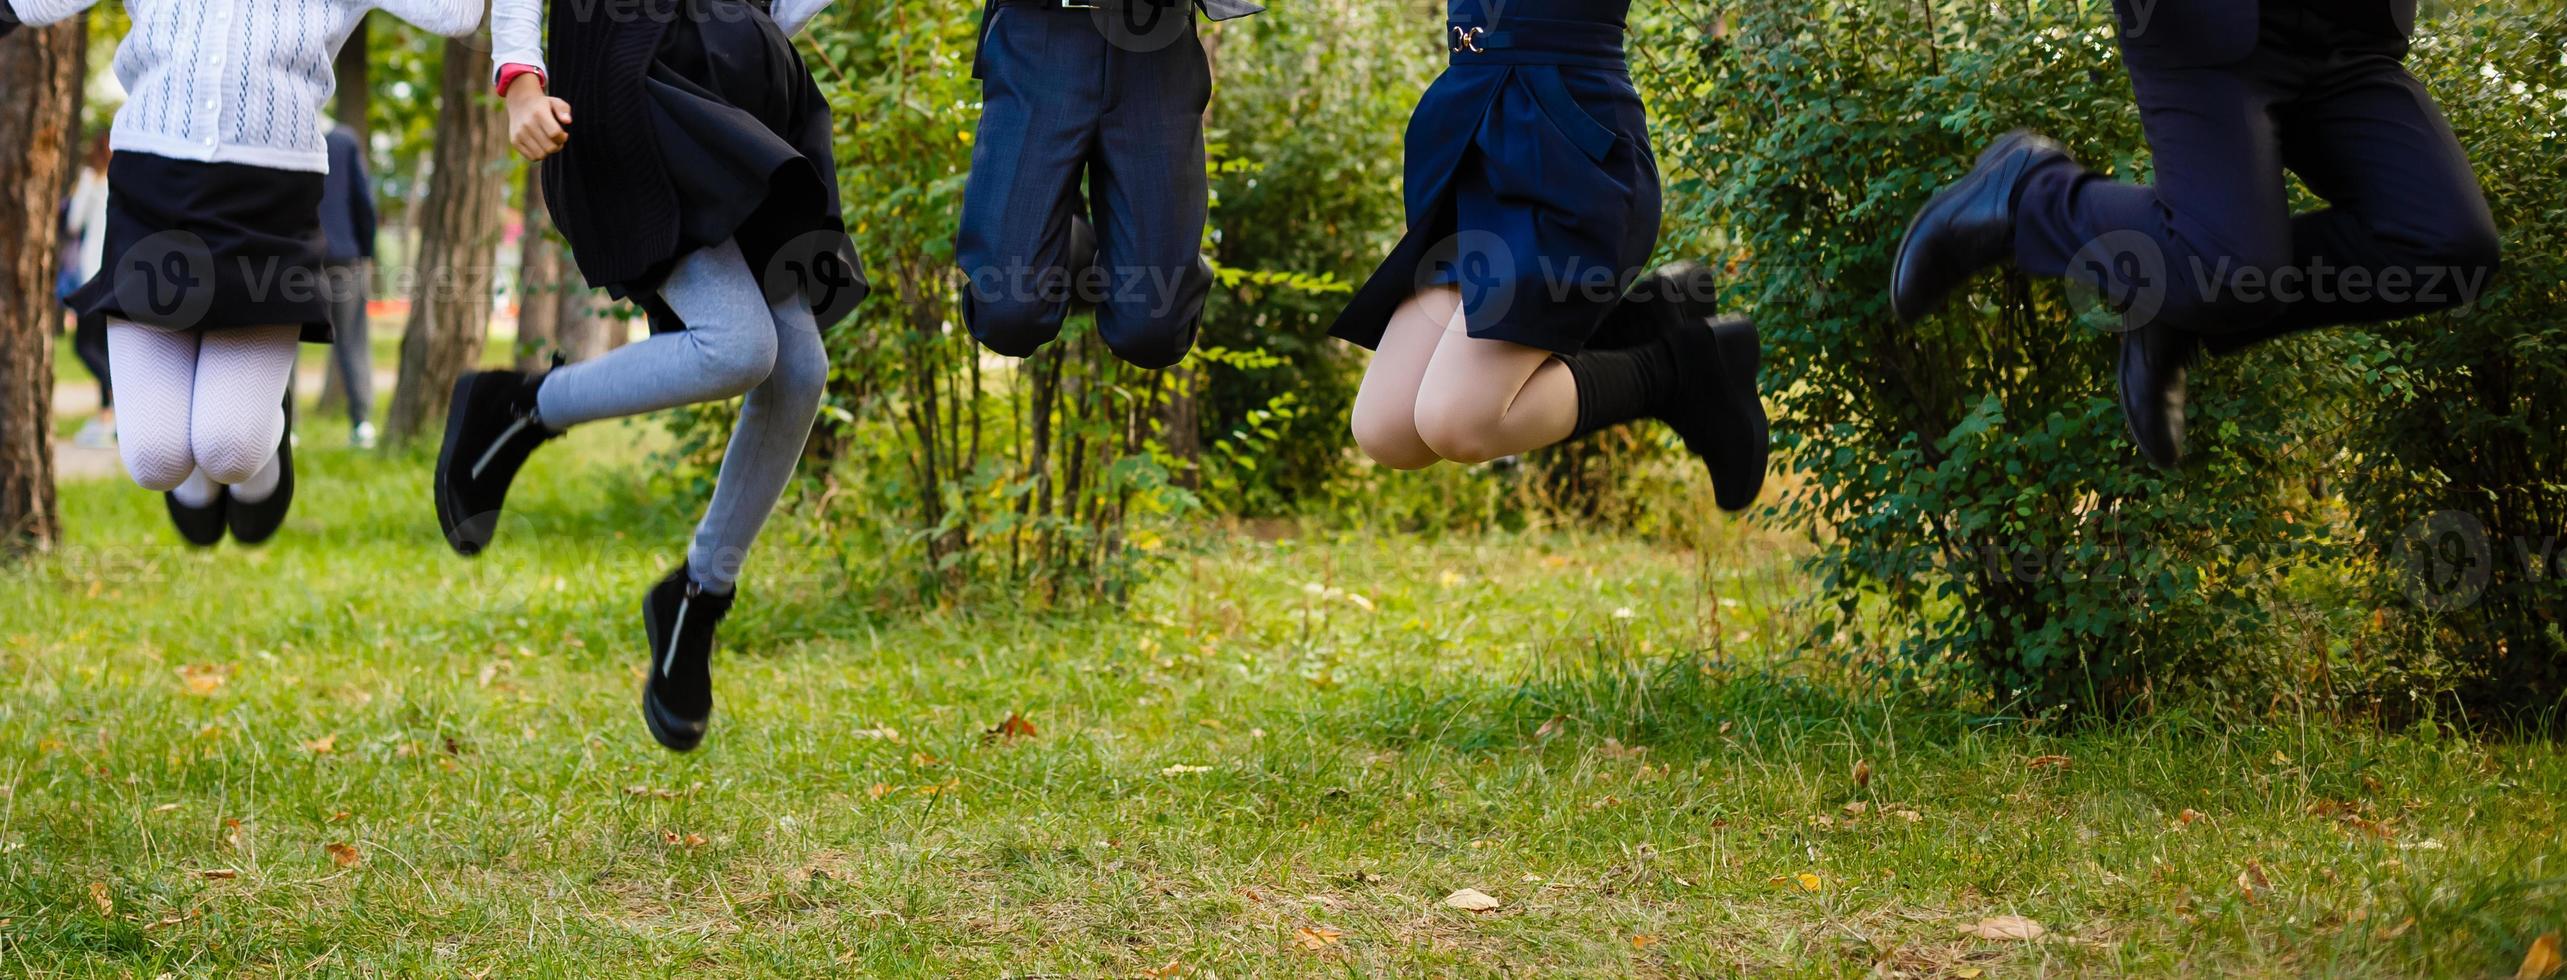 Kids jumping in a orchard summer day photo